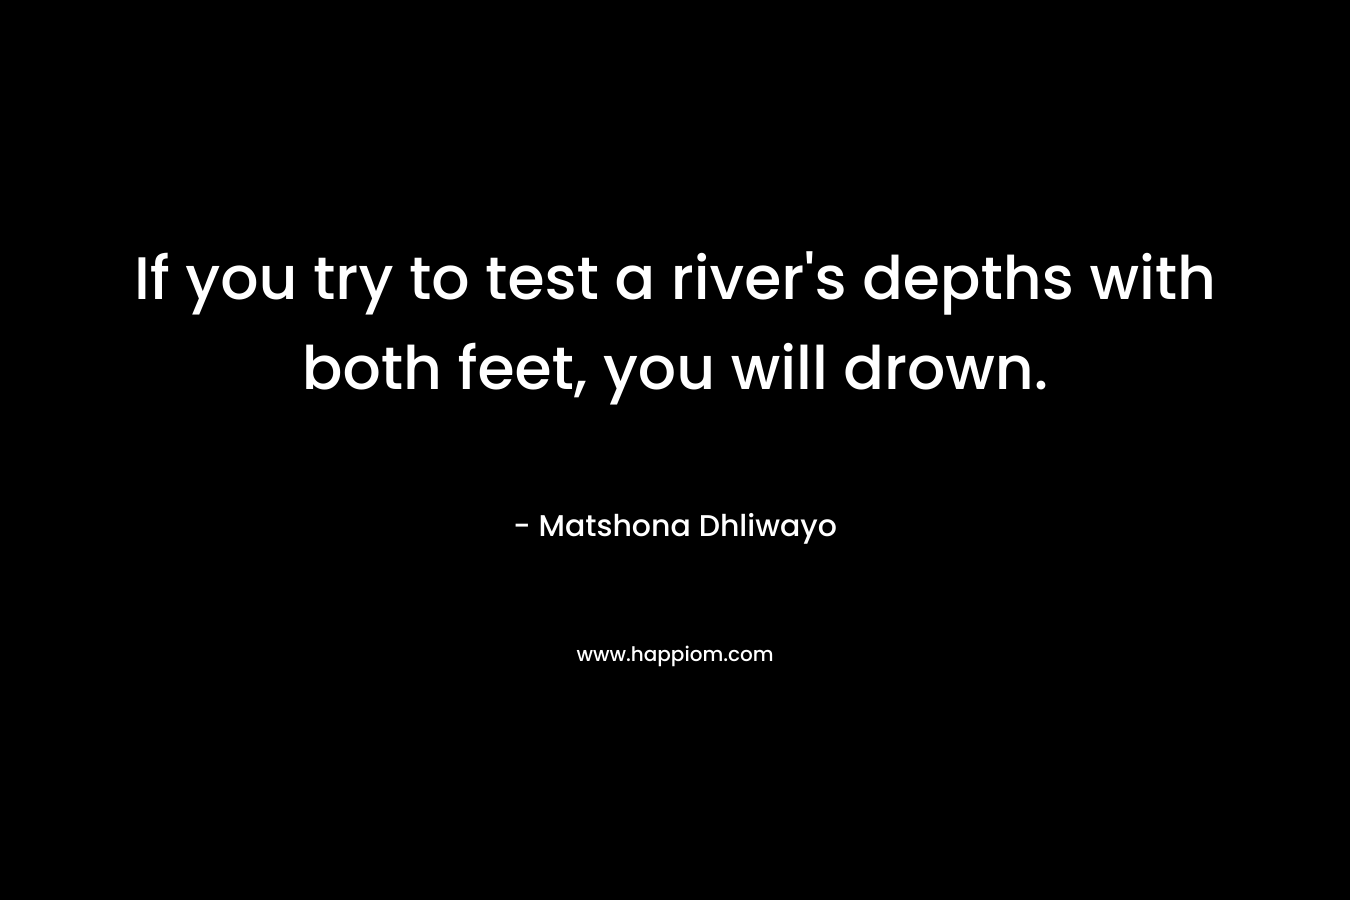 If you try to test a river's depths with both feet, you will drown.